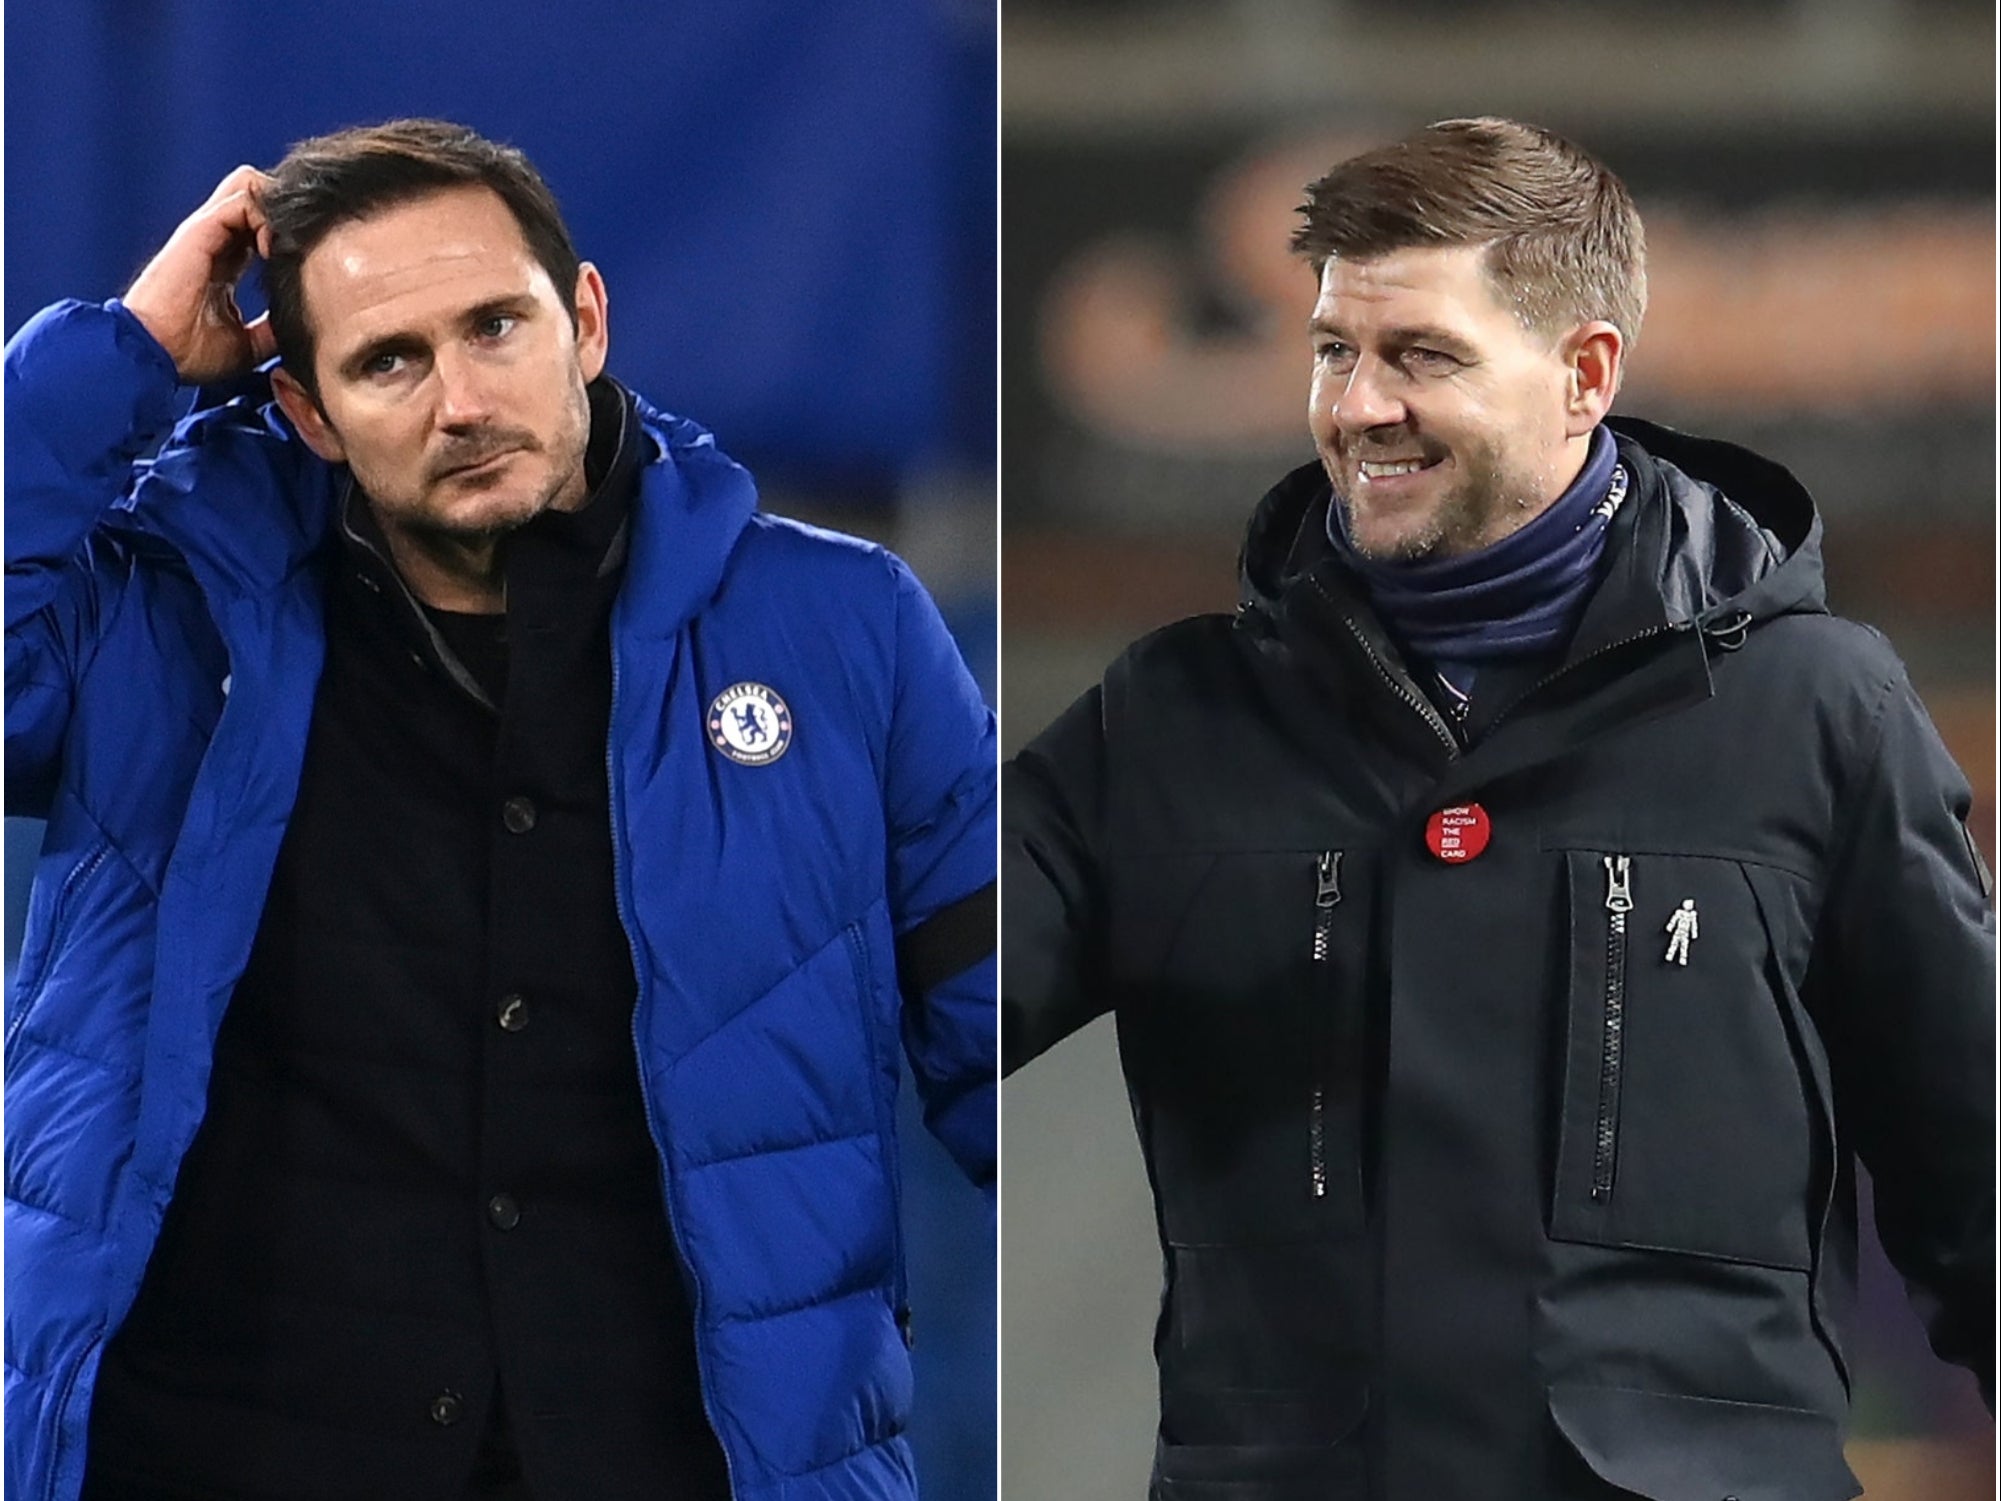 Frank Lampard and Steven Gerrard are just starting out life as managers